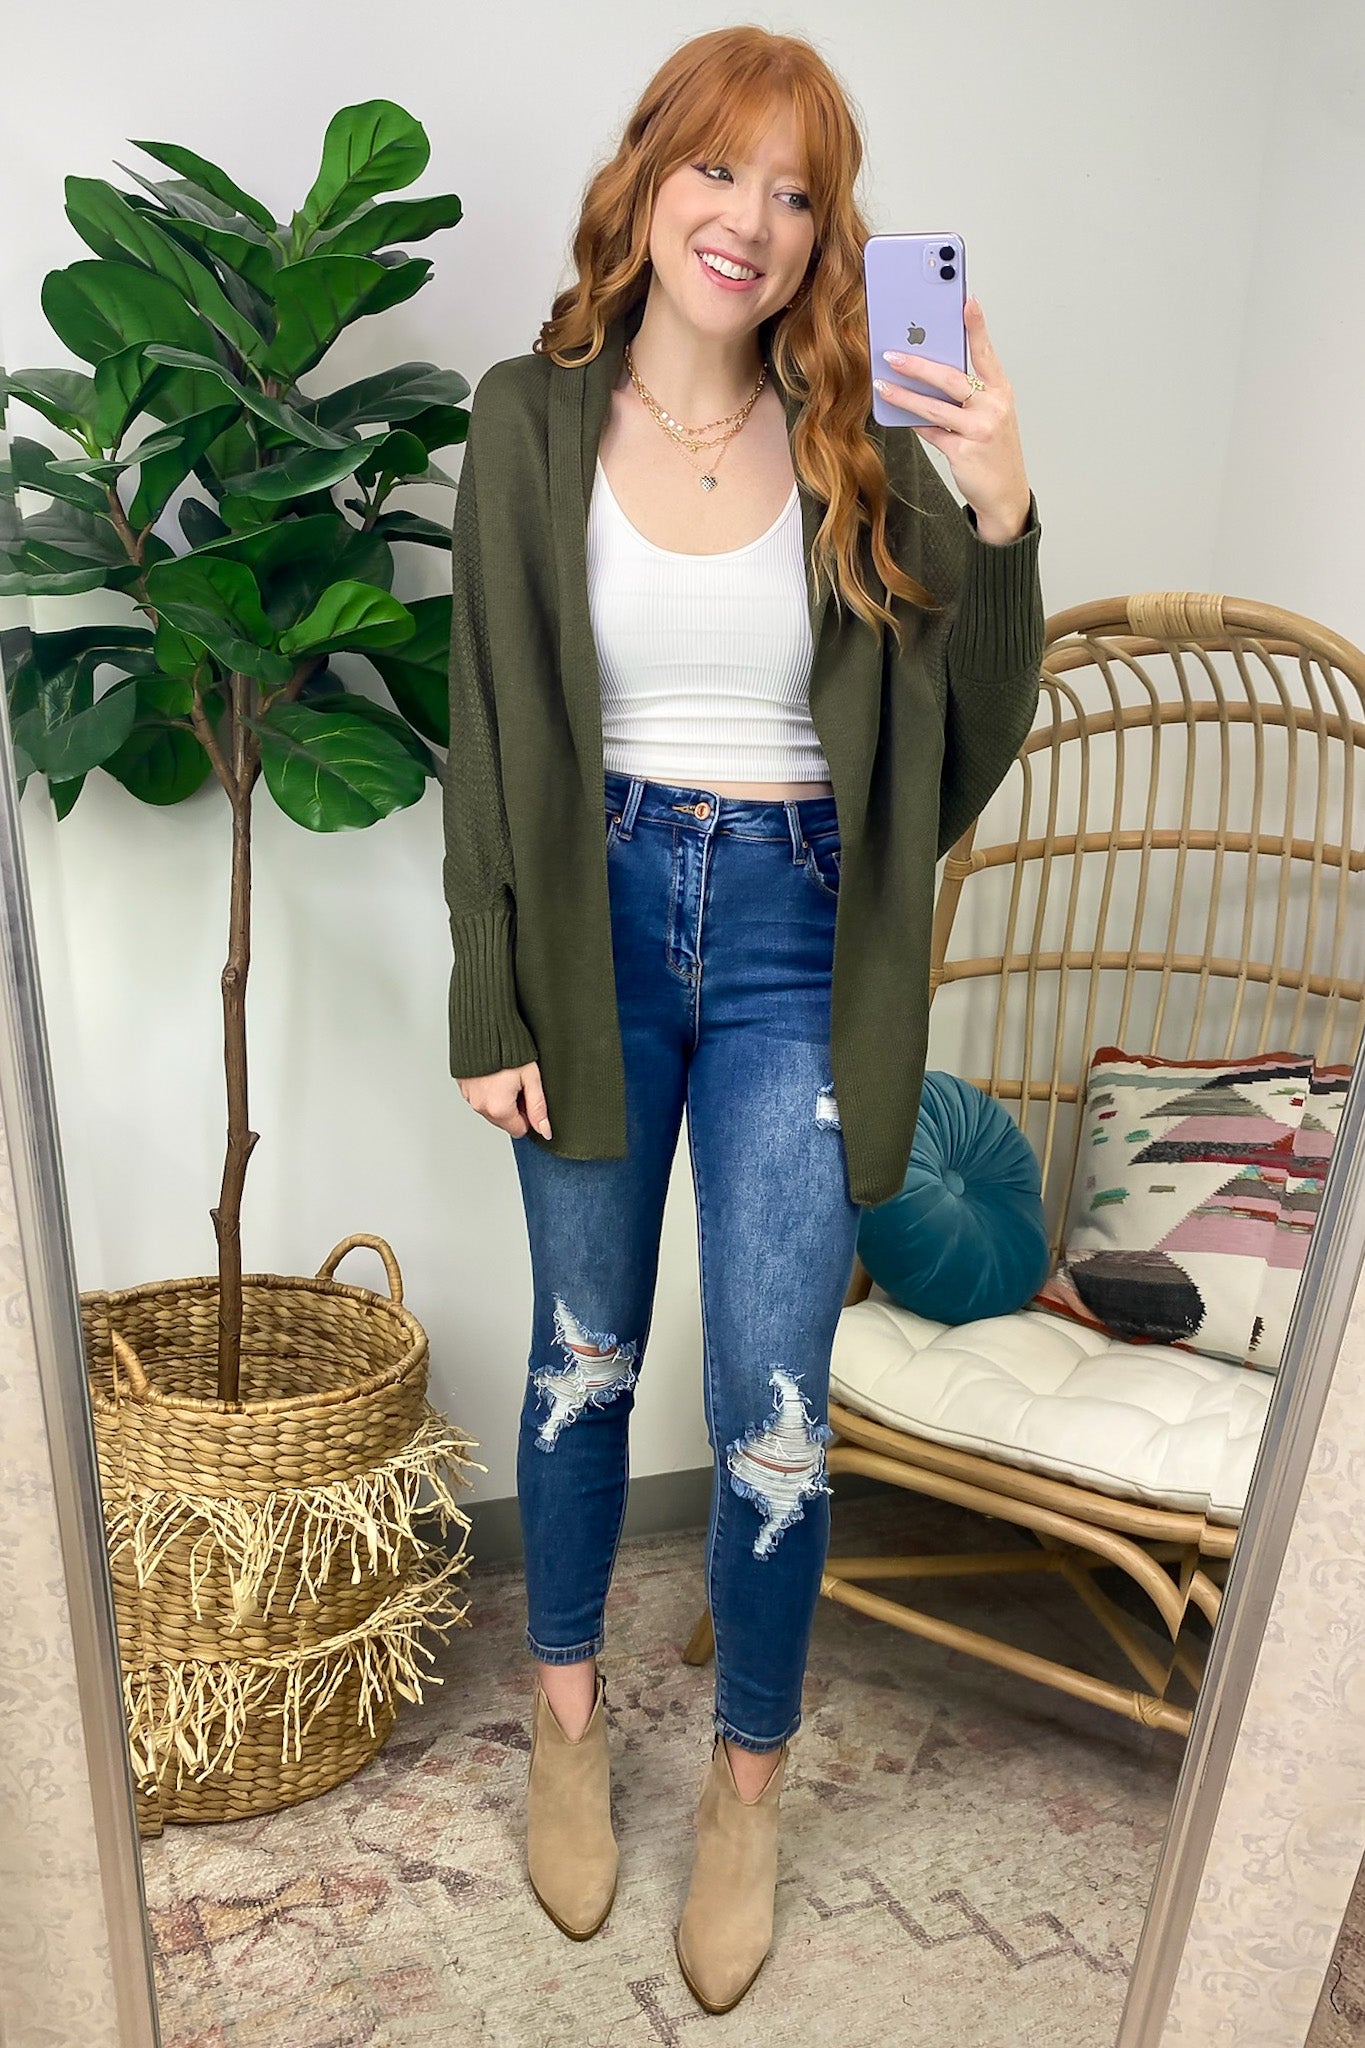  Endlessly Cozy Batwing Open Front Cardigan - FINAL SALE - Madison and Mallory